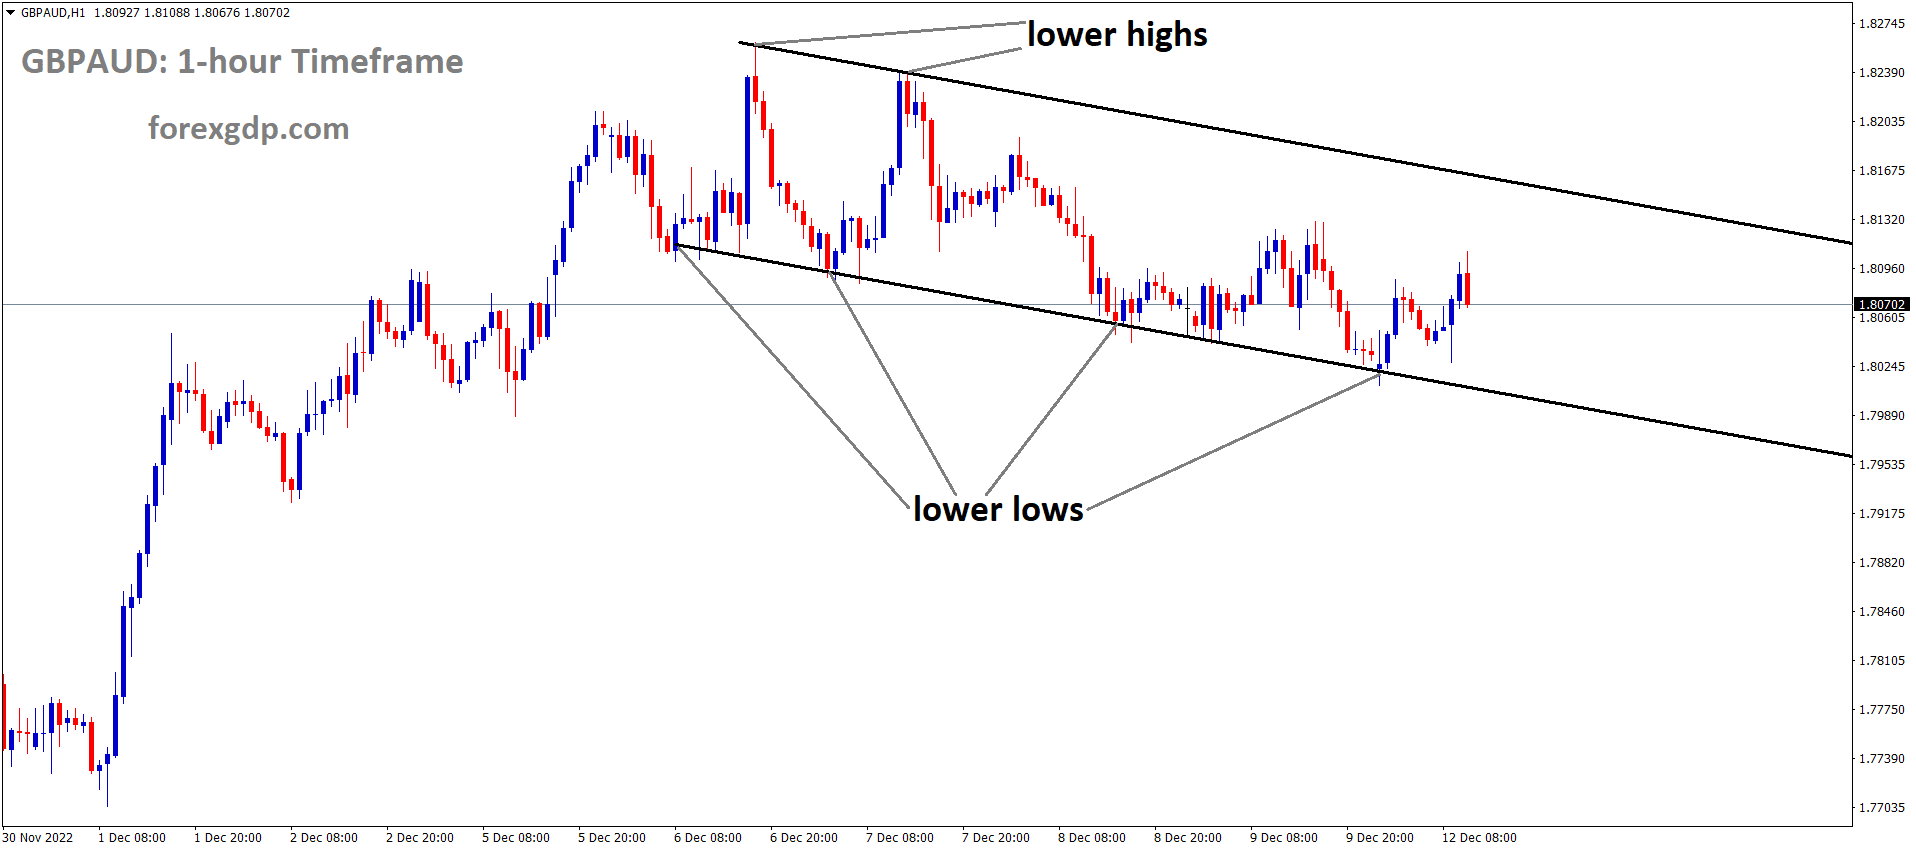 GBPAUD is moving in a Descending channel and the market has rebounded from the lower low area of the channel